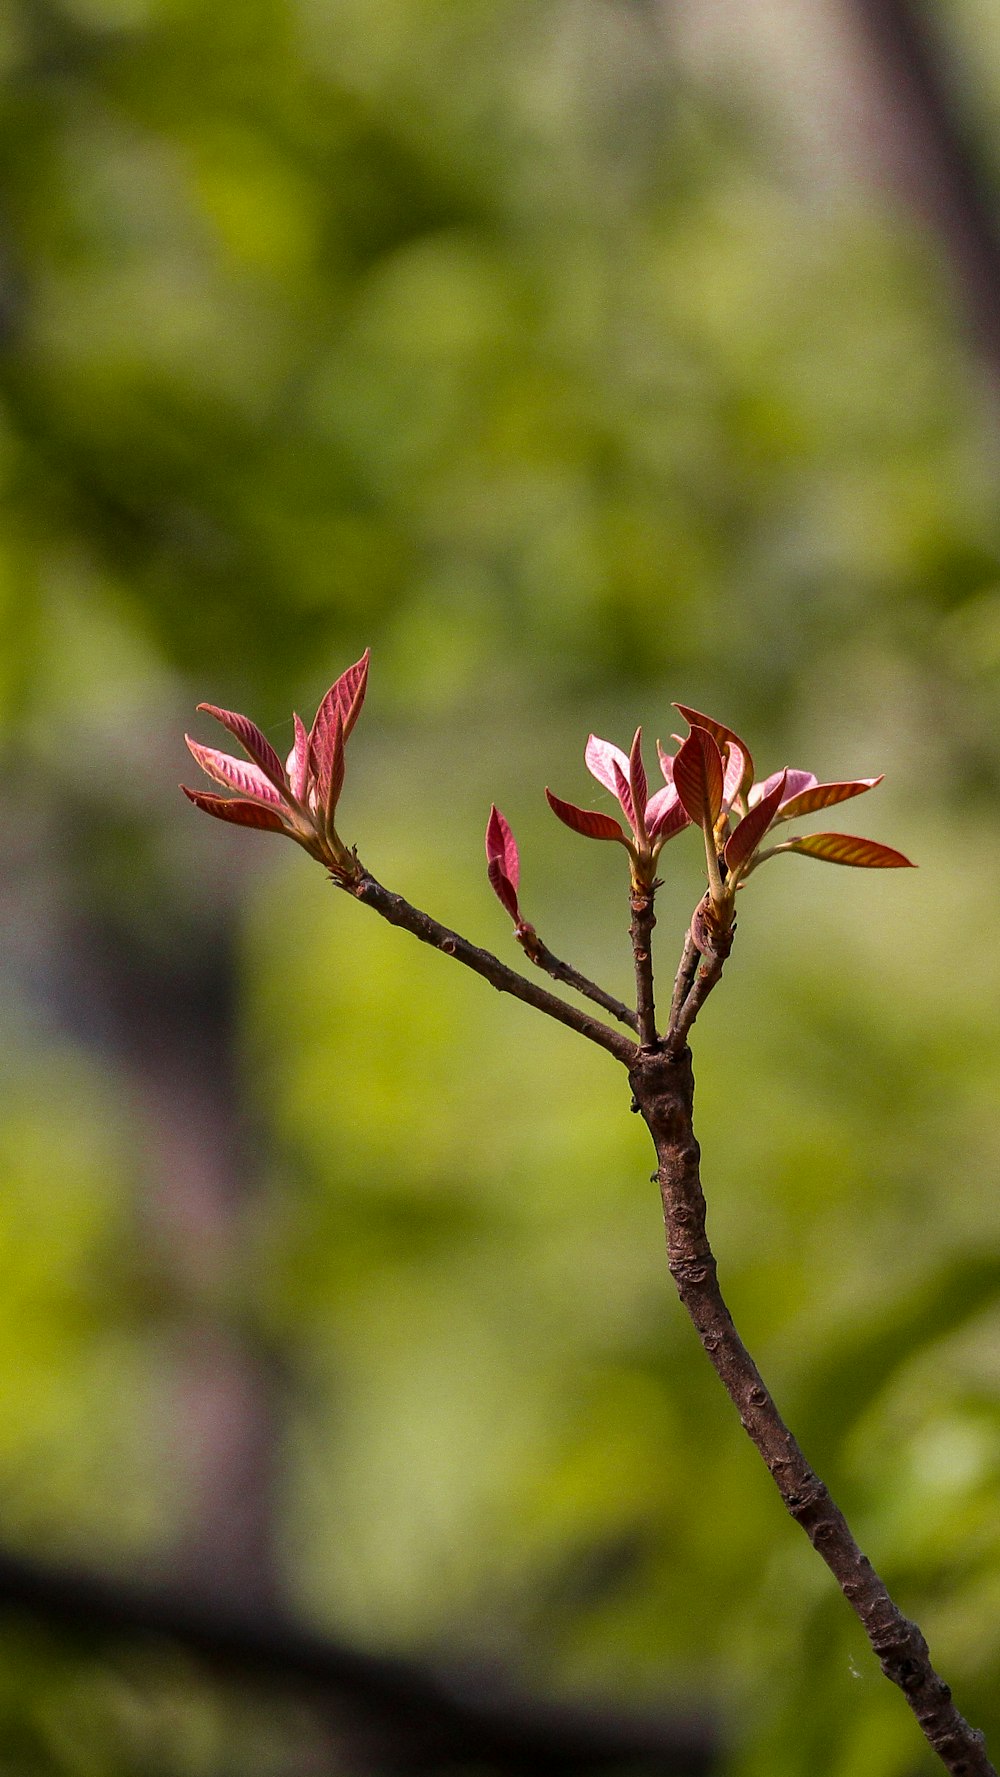 a small branch with red flowers on it